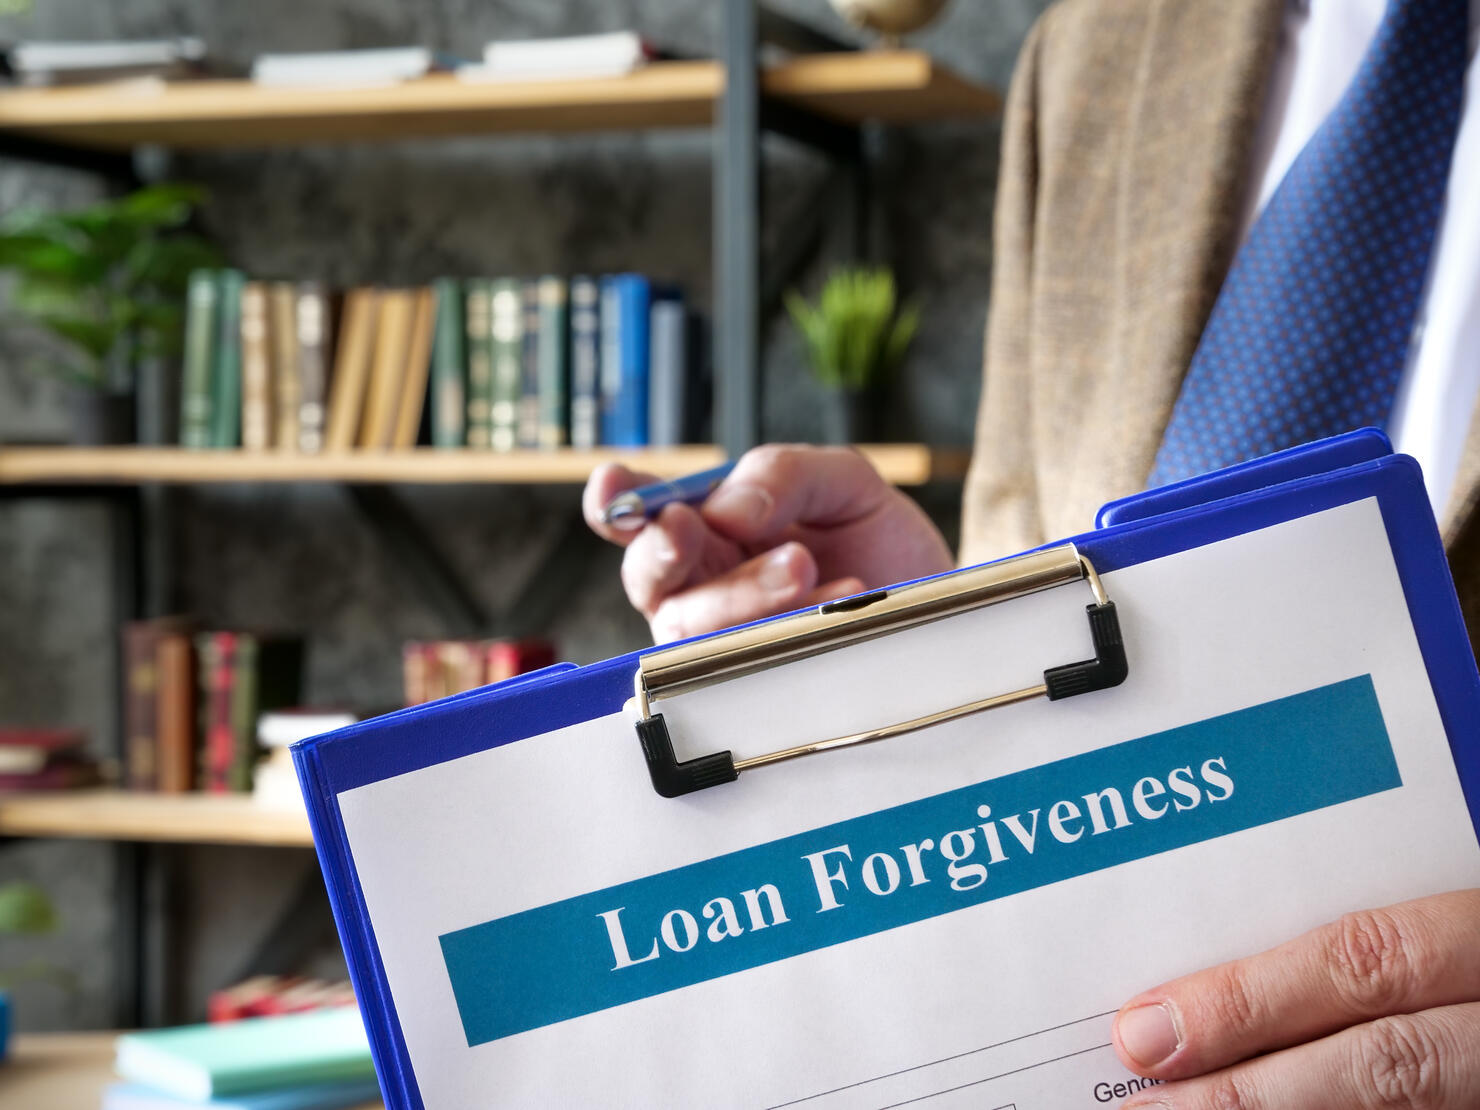 A Manager and loan forgiveness application form.